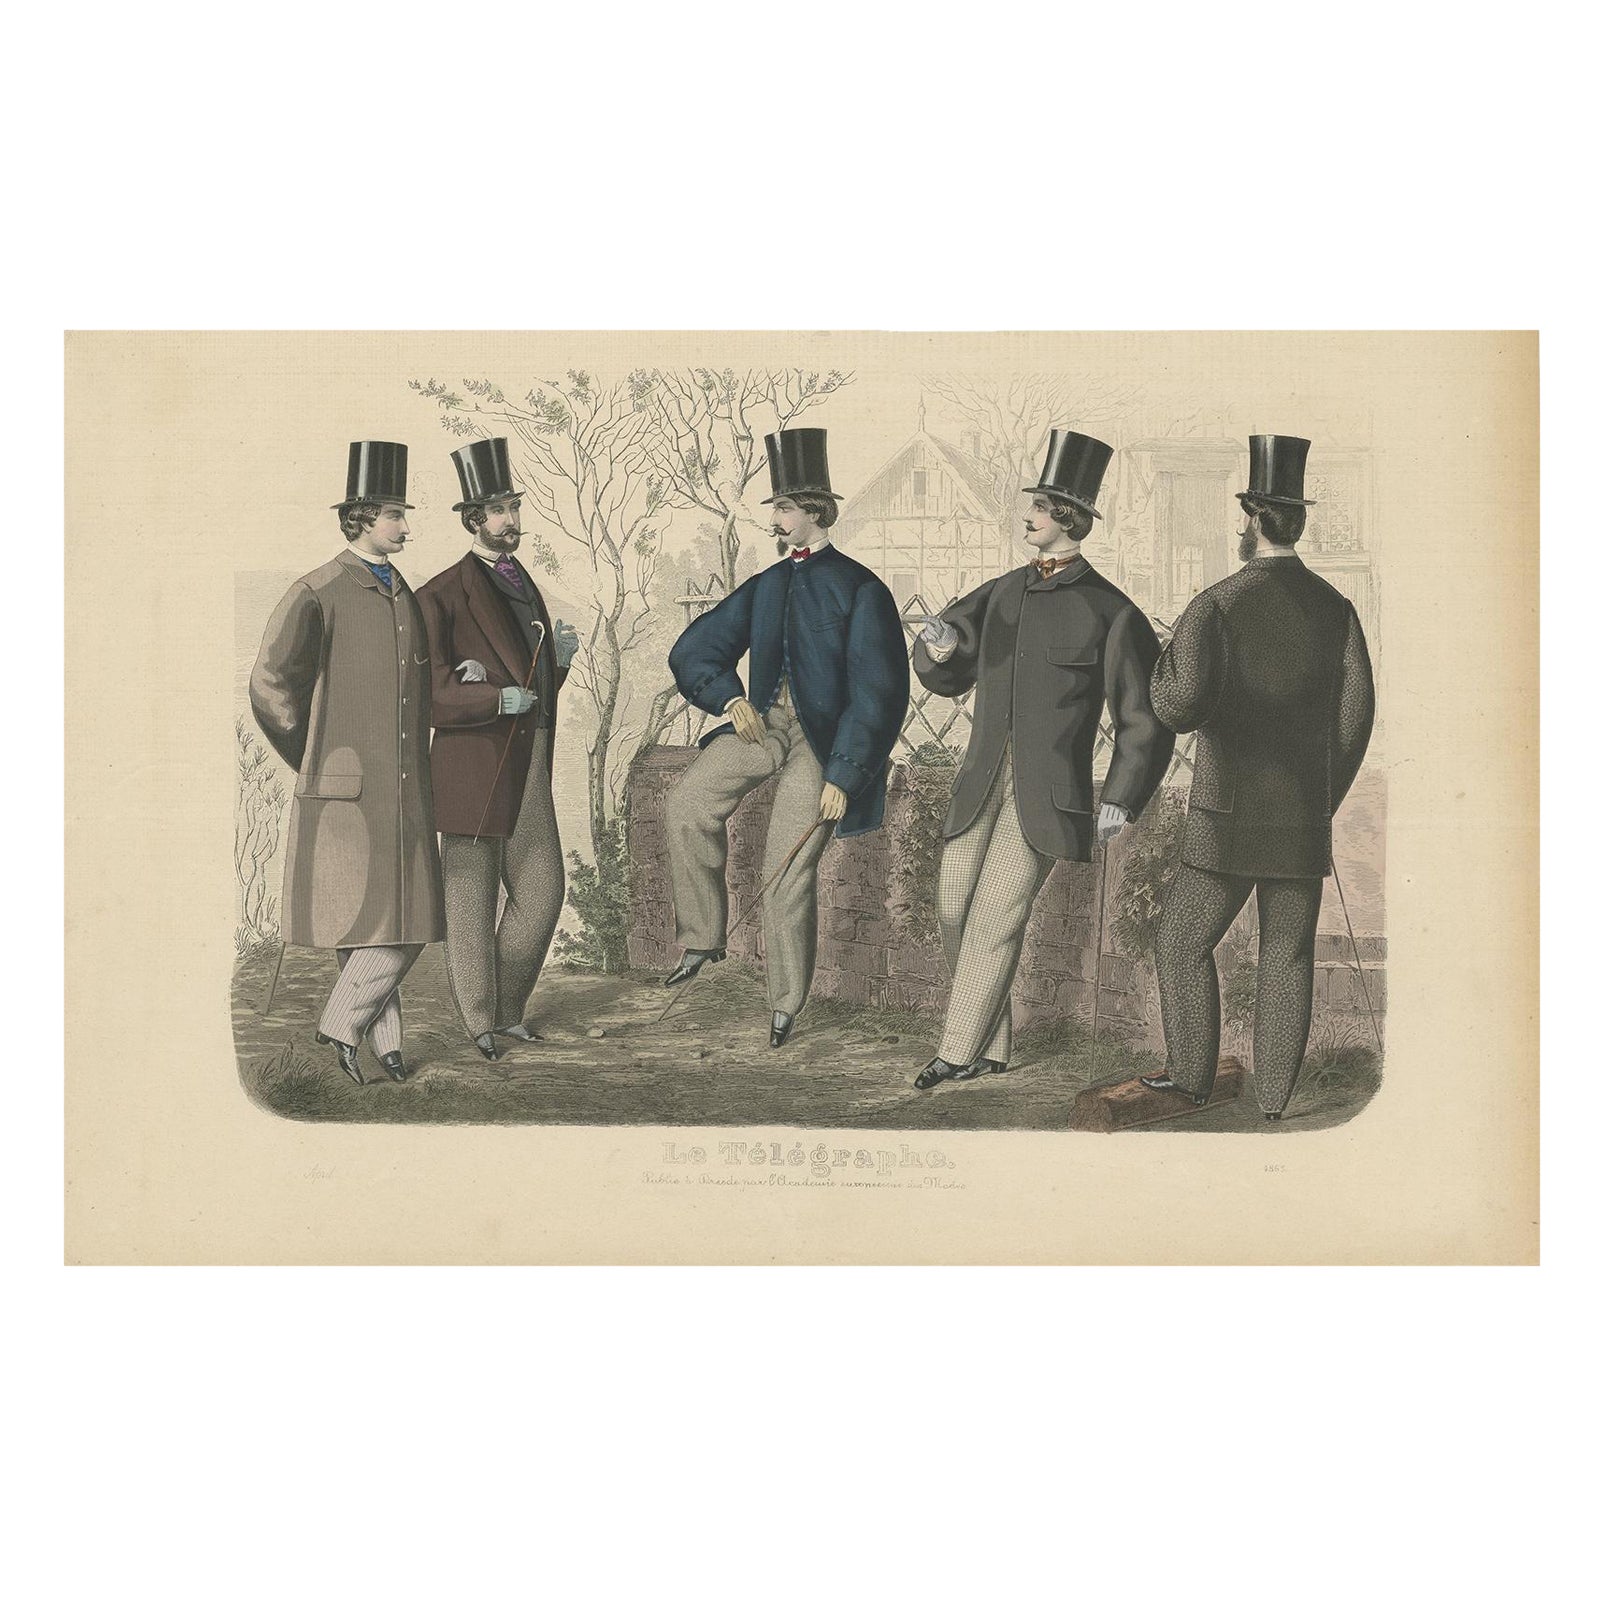 Antique Fashion Print of Men and Women Illustrating the Fashion Trends of 1865